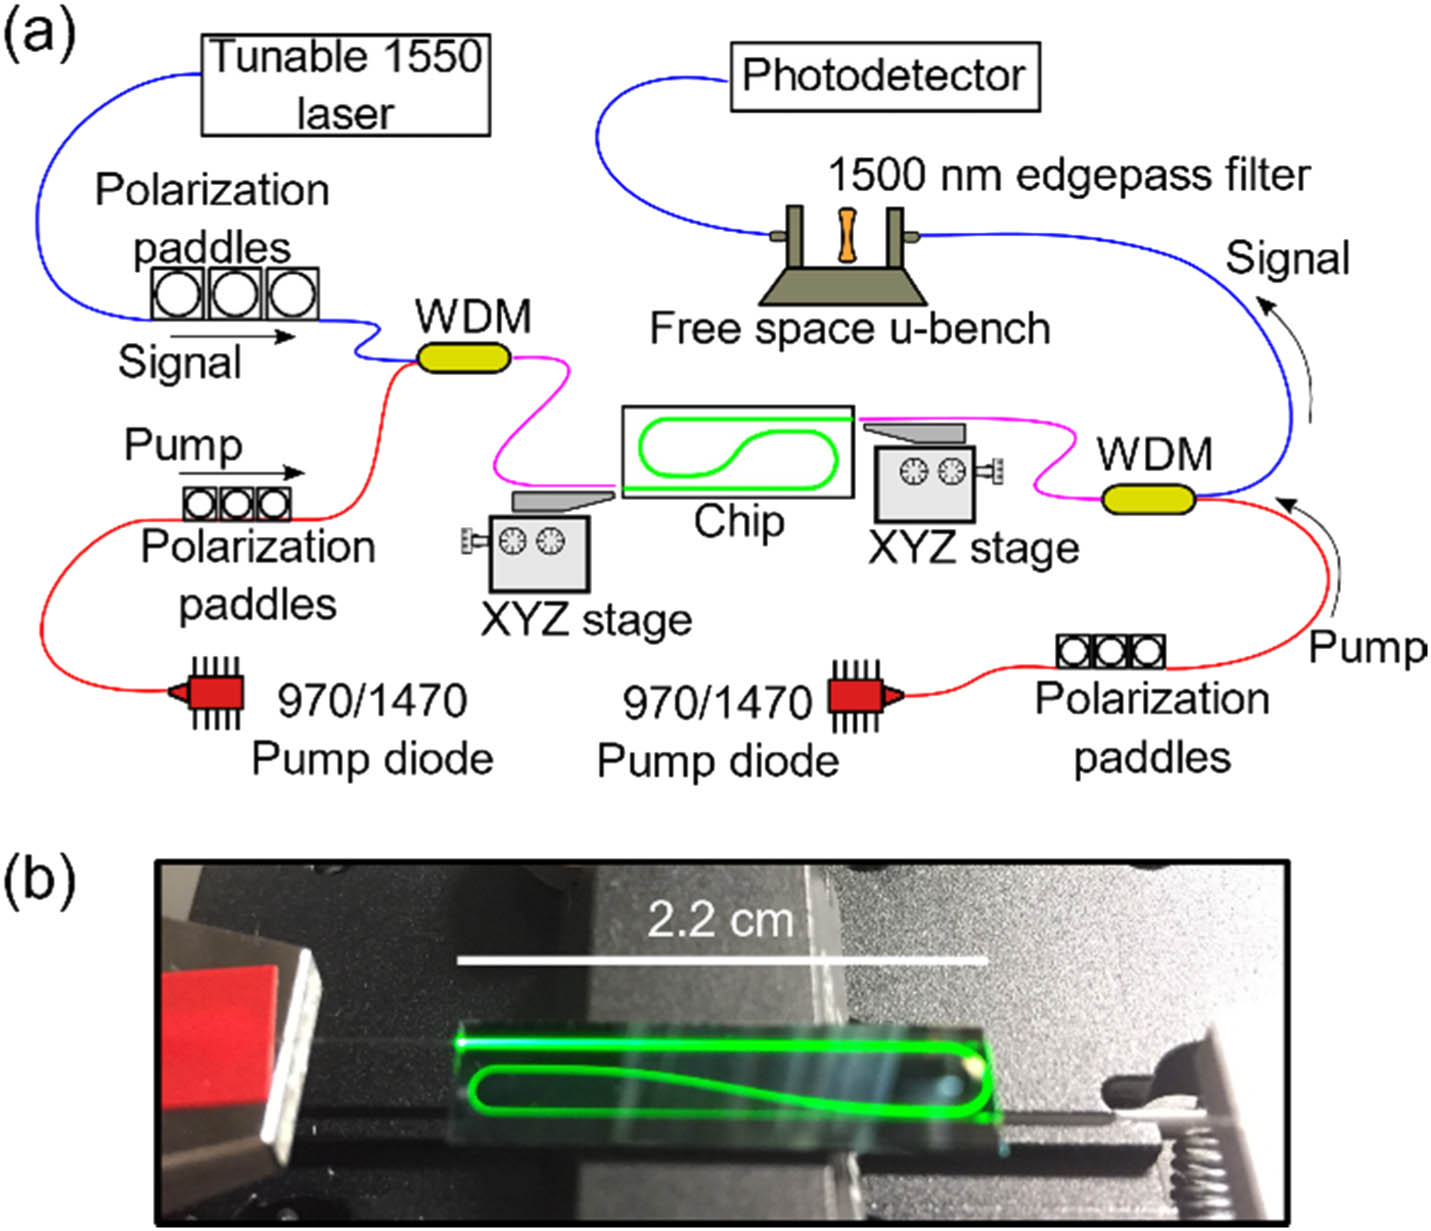 Diagram of the double-side pumping setup used to measure gain on the TeO2:Er3+-coated Si3N4 chips. (b) Image of the chip showing the characteristic green light emission of erbium when pumping the paperclip waveguide.